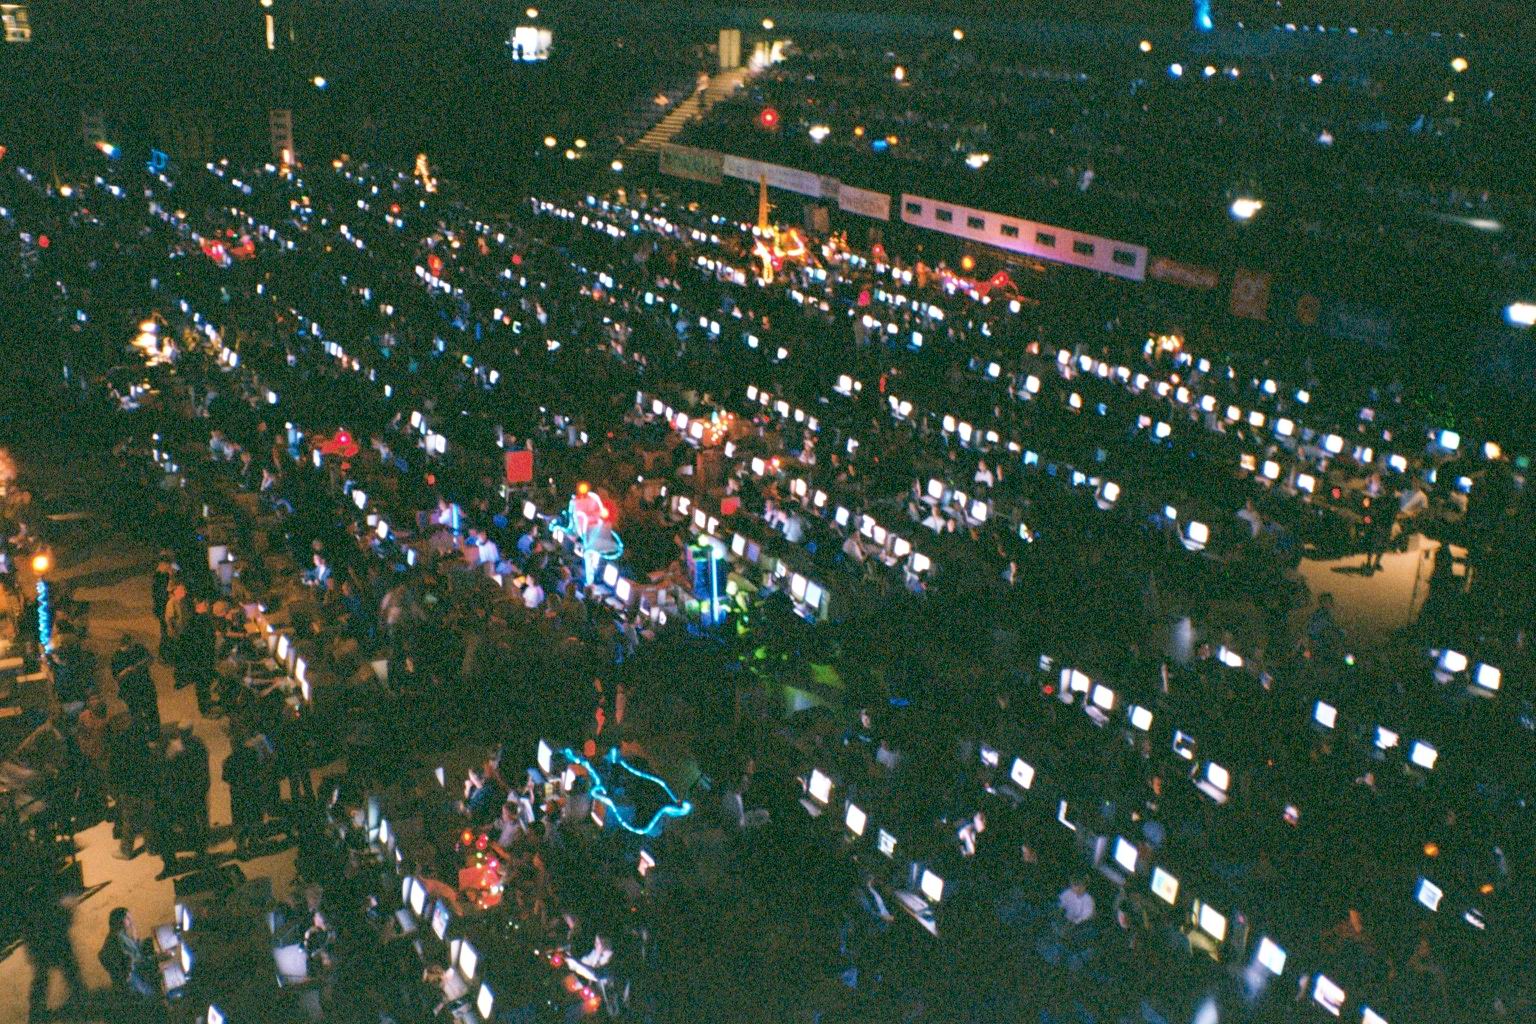 The computers at the Assembly 2001 demo party in Helsinki